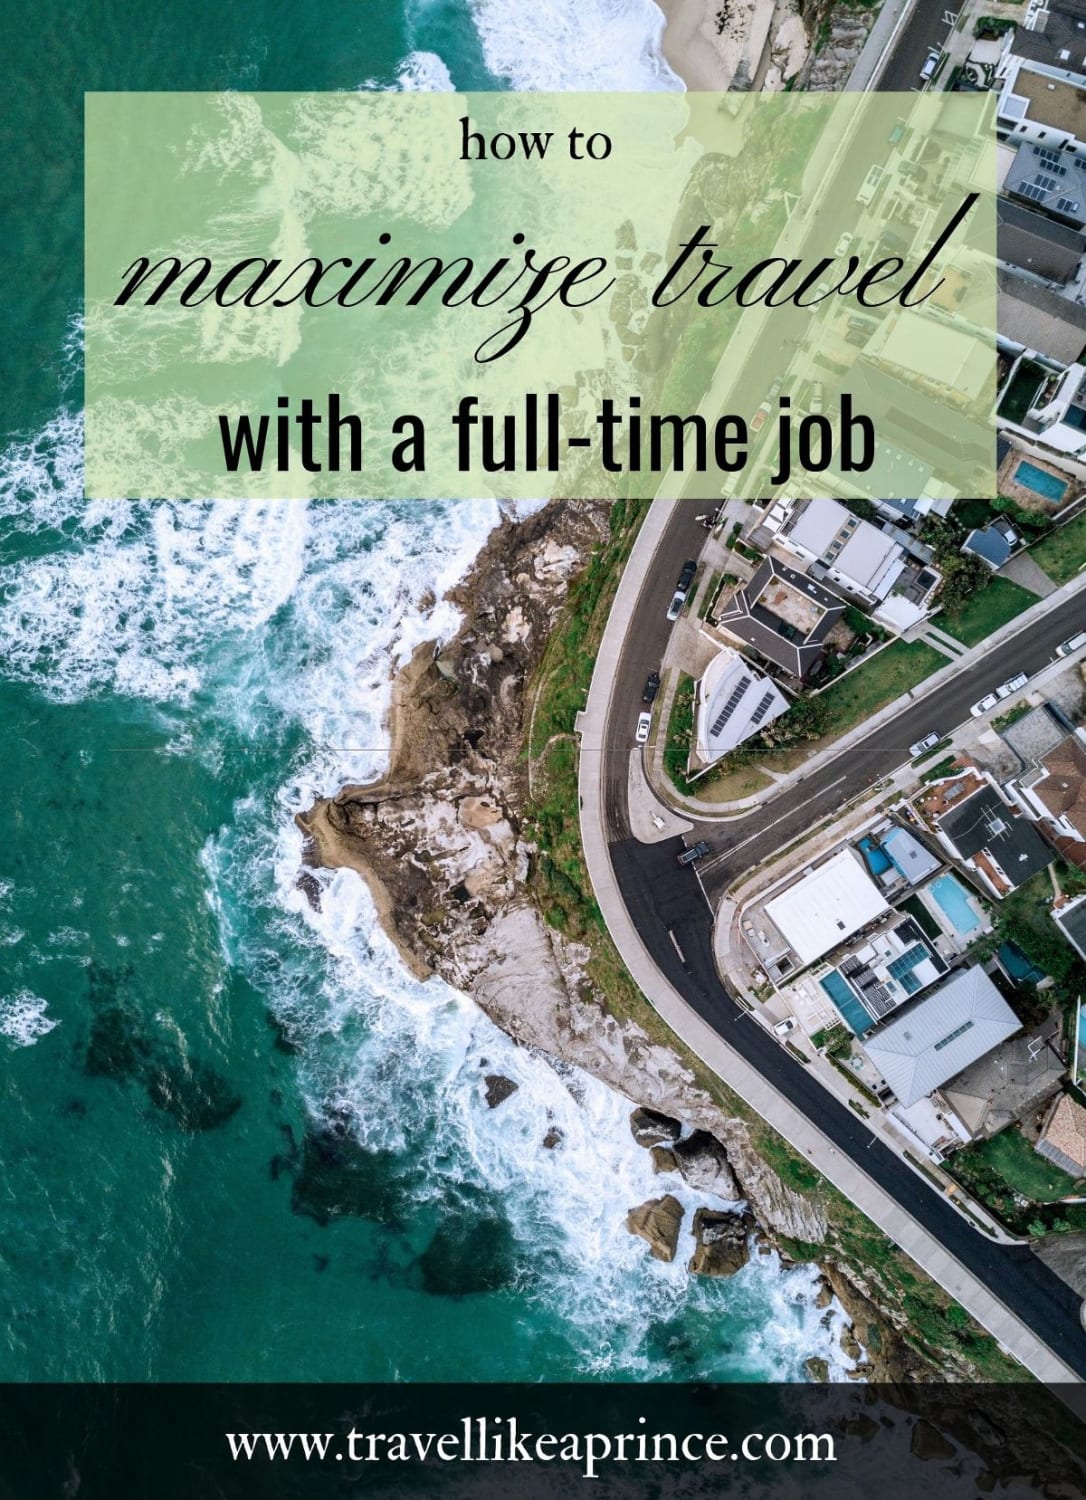 How to Maximize Travel With a Full-time Job